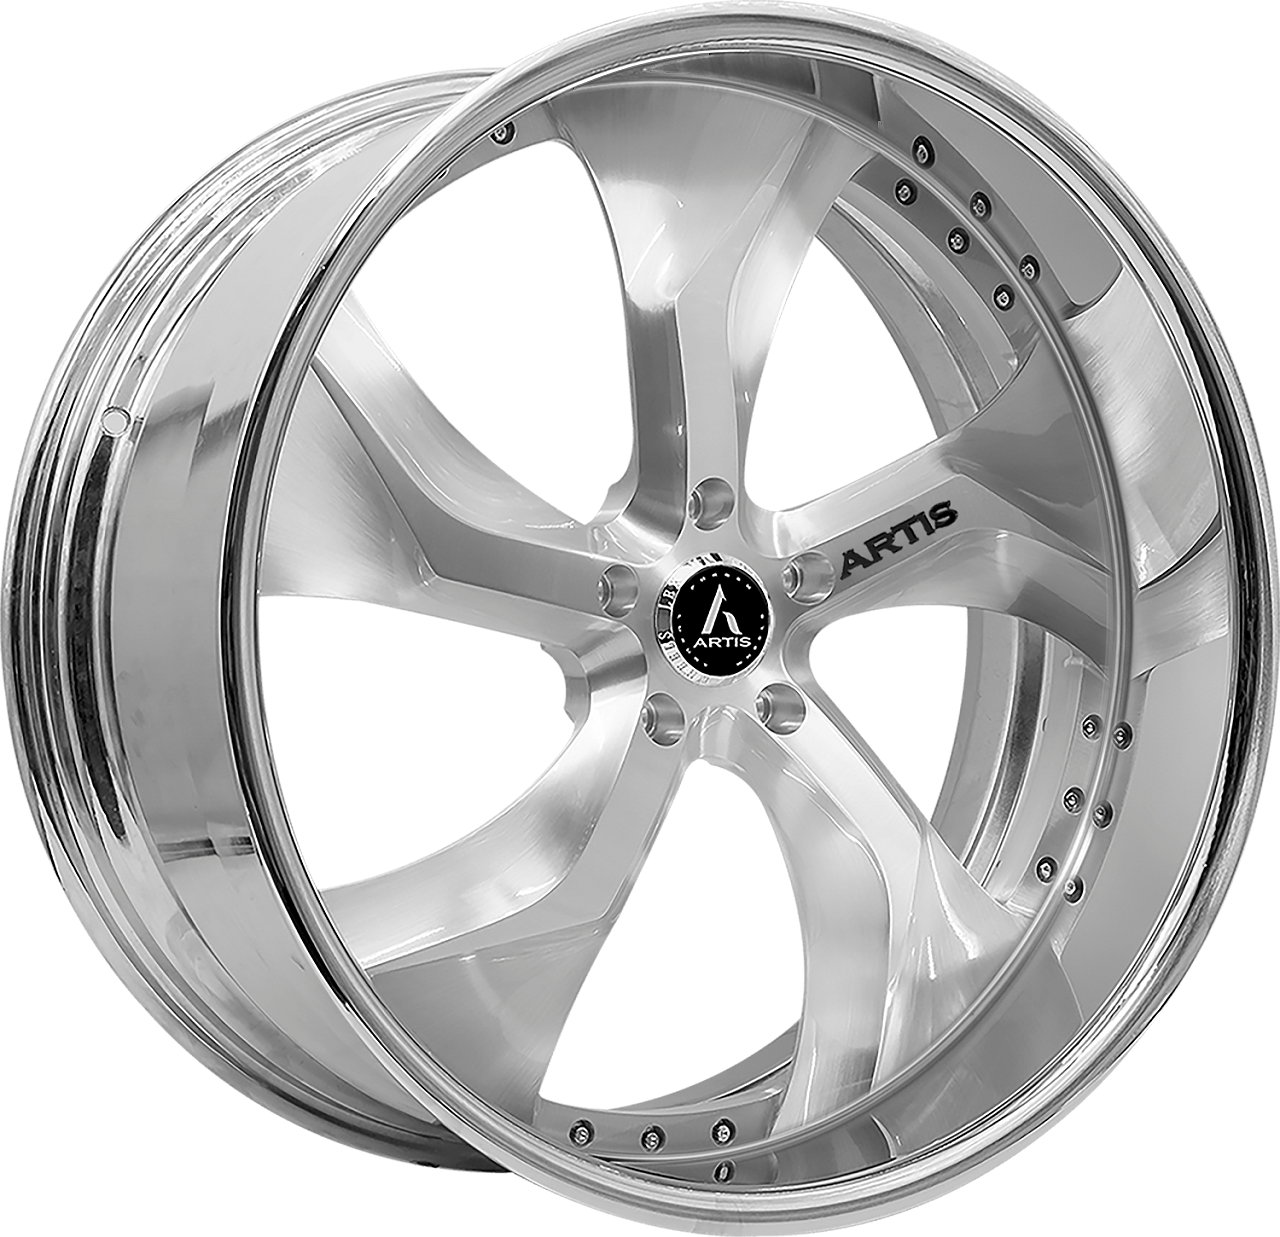 Artis Forged Bully-M wheel with Brushed finish